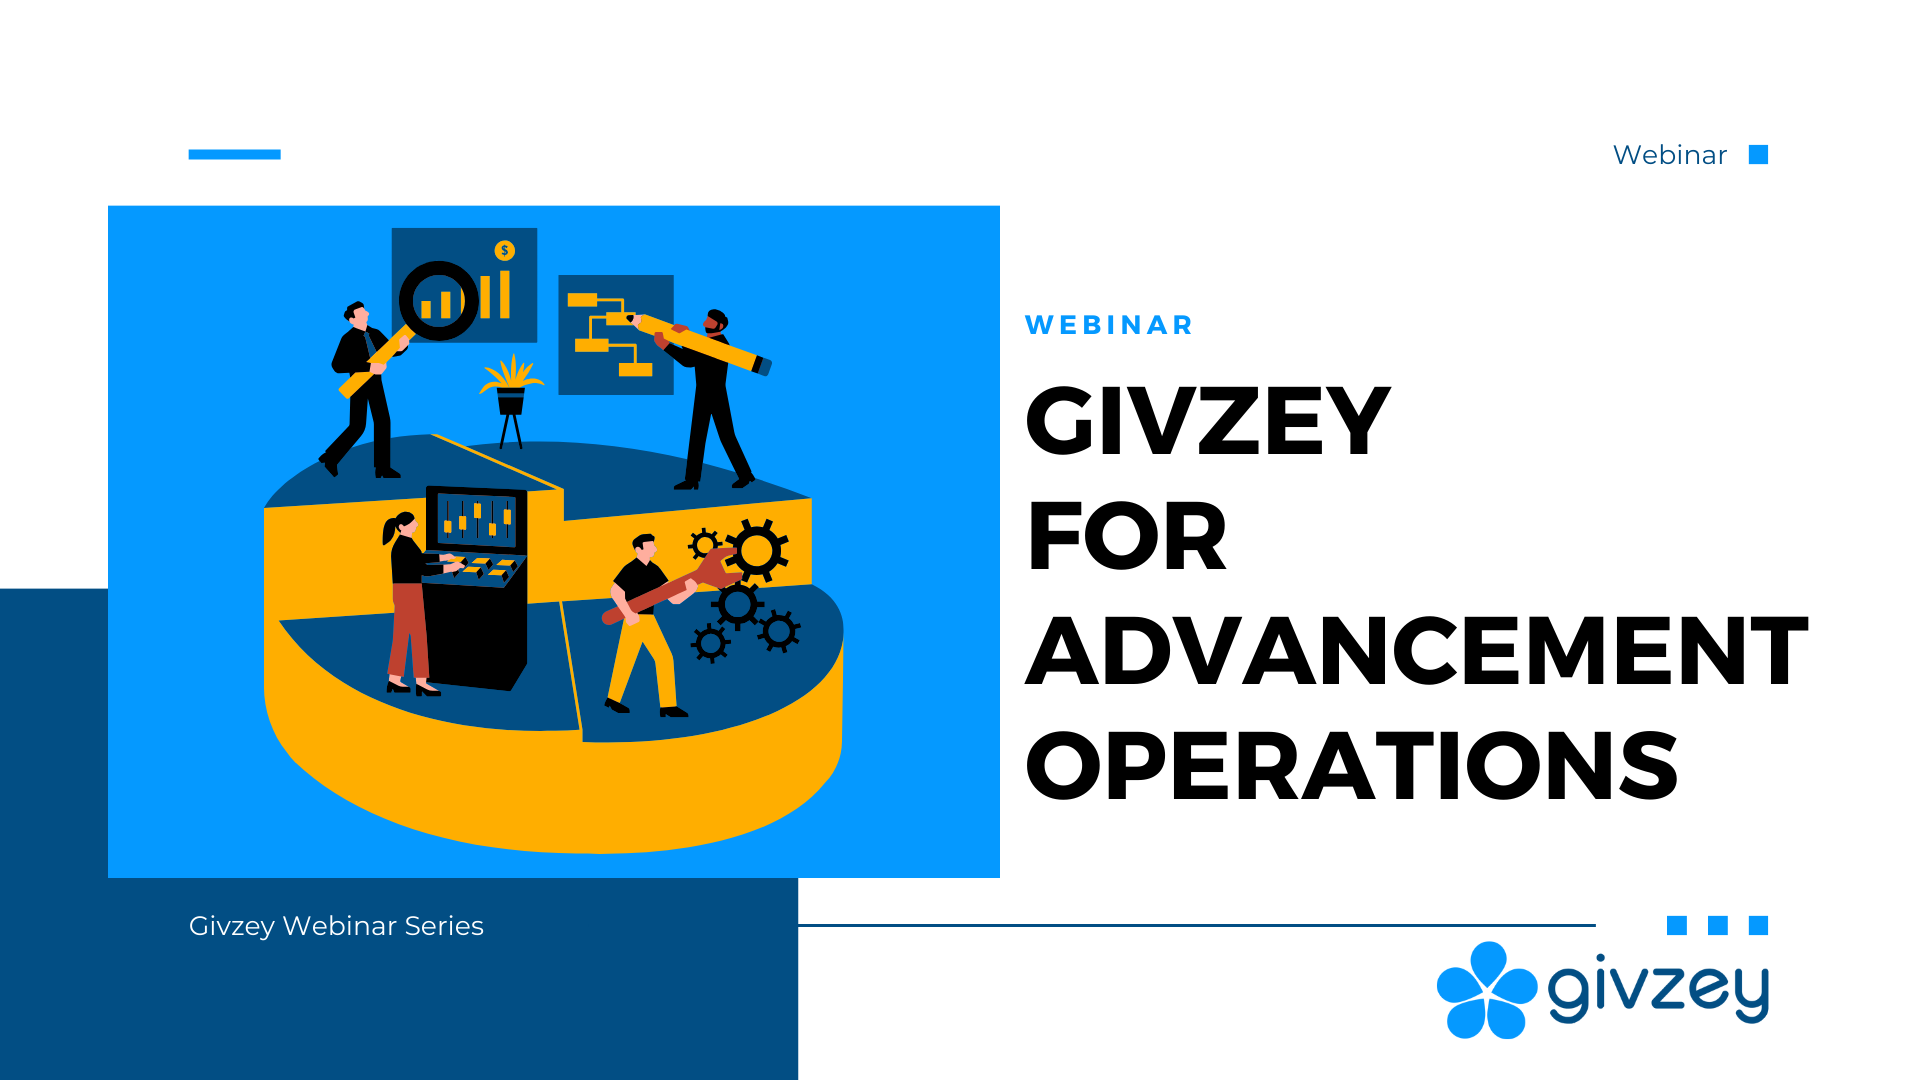 Givzey for Advancement Operations